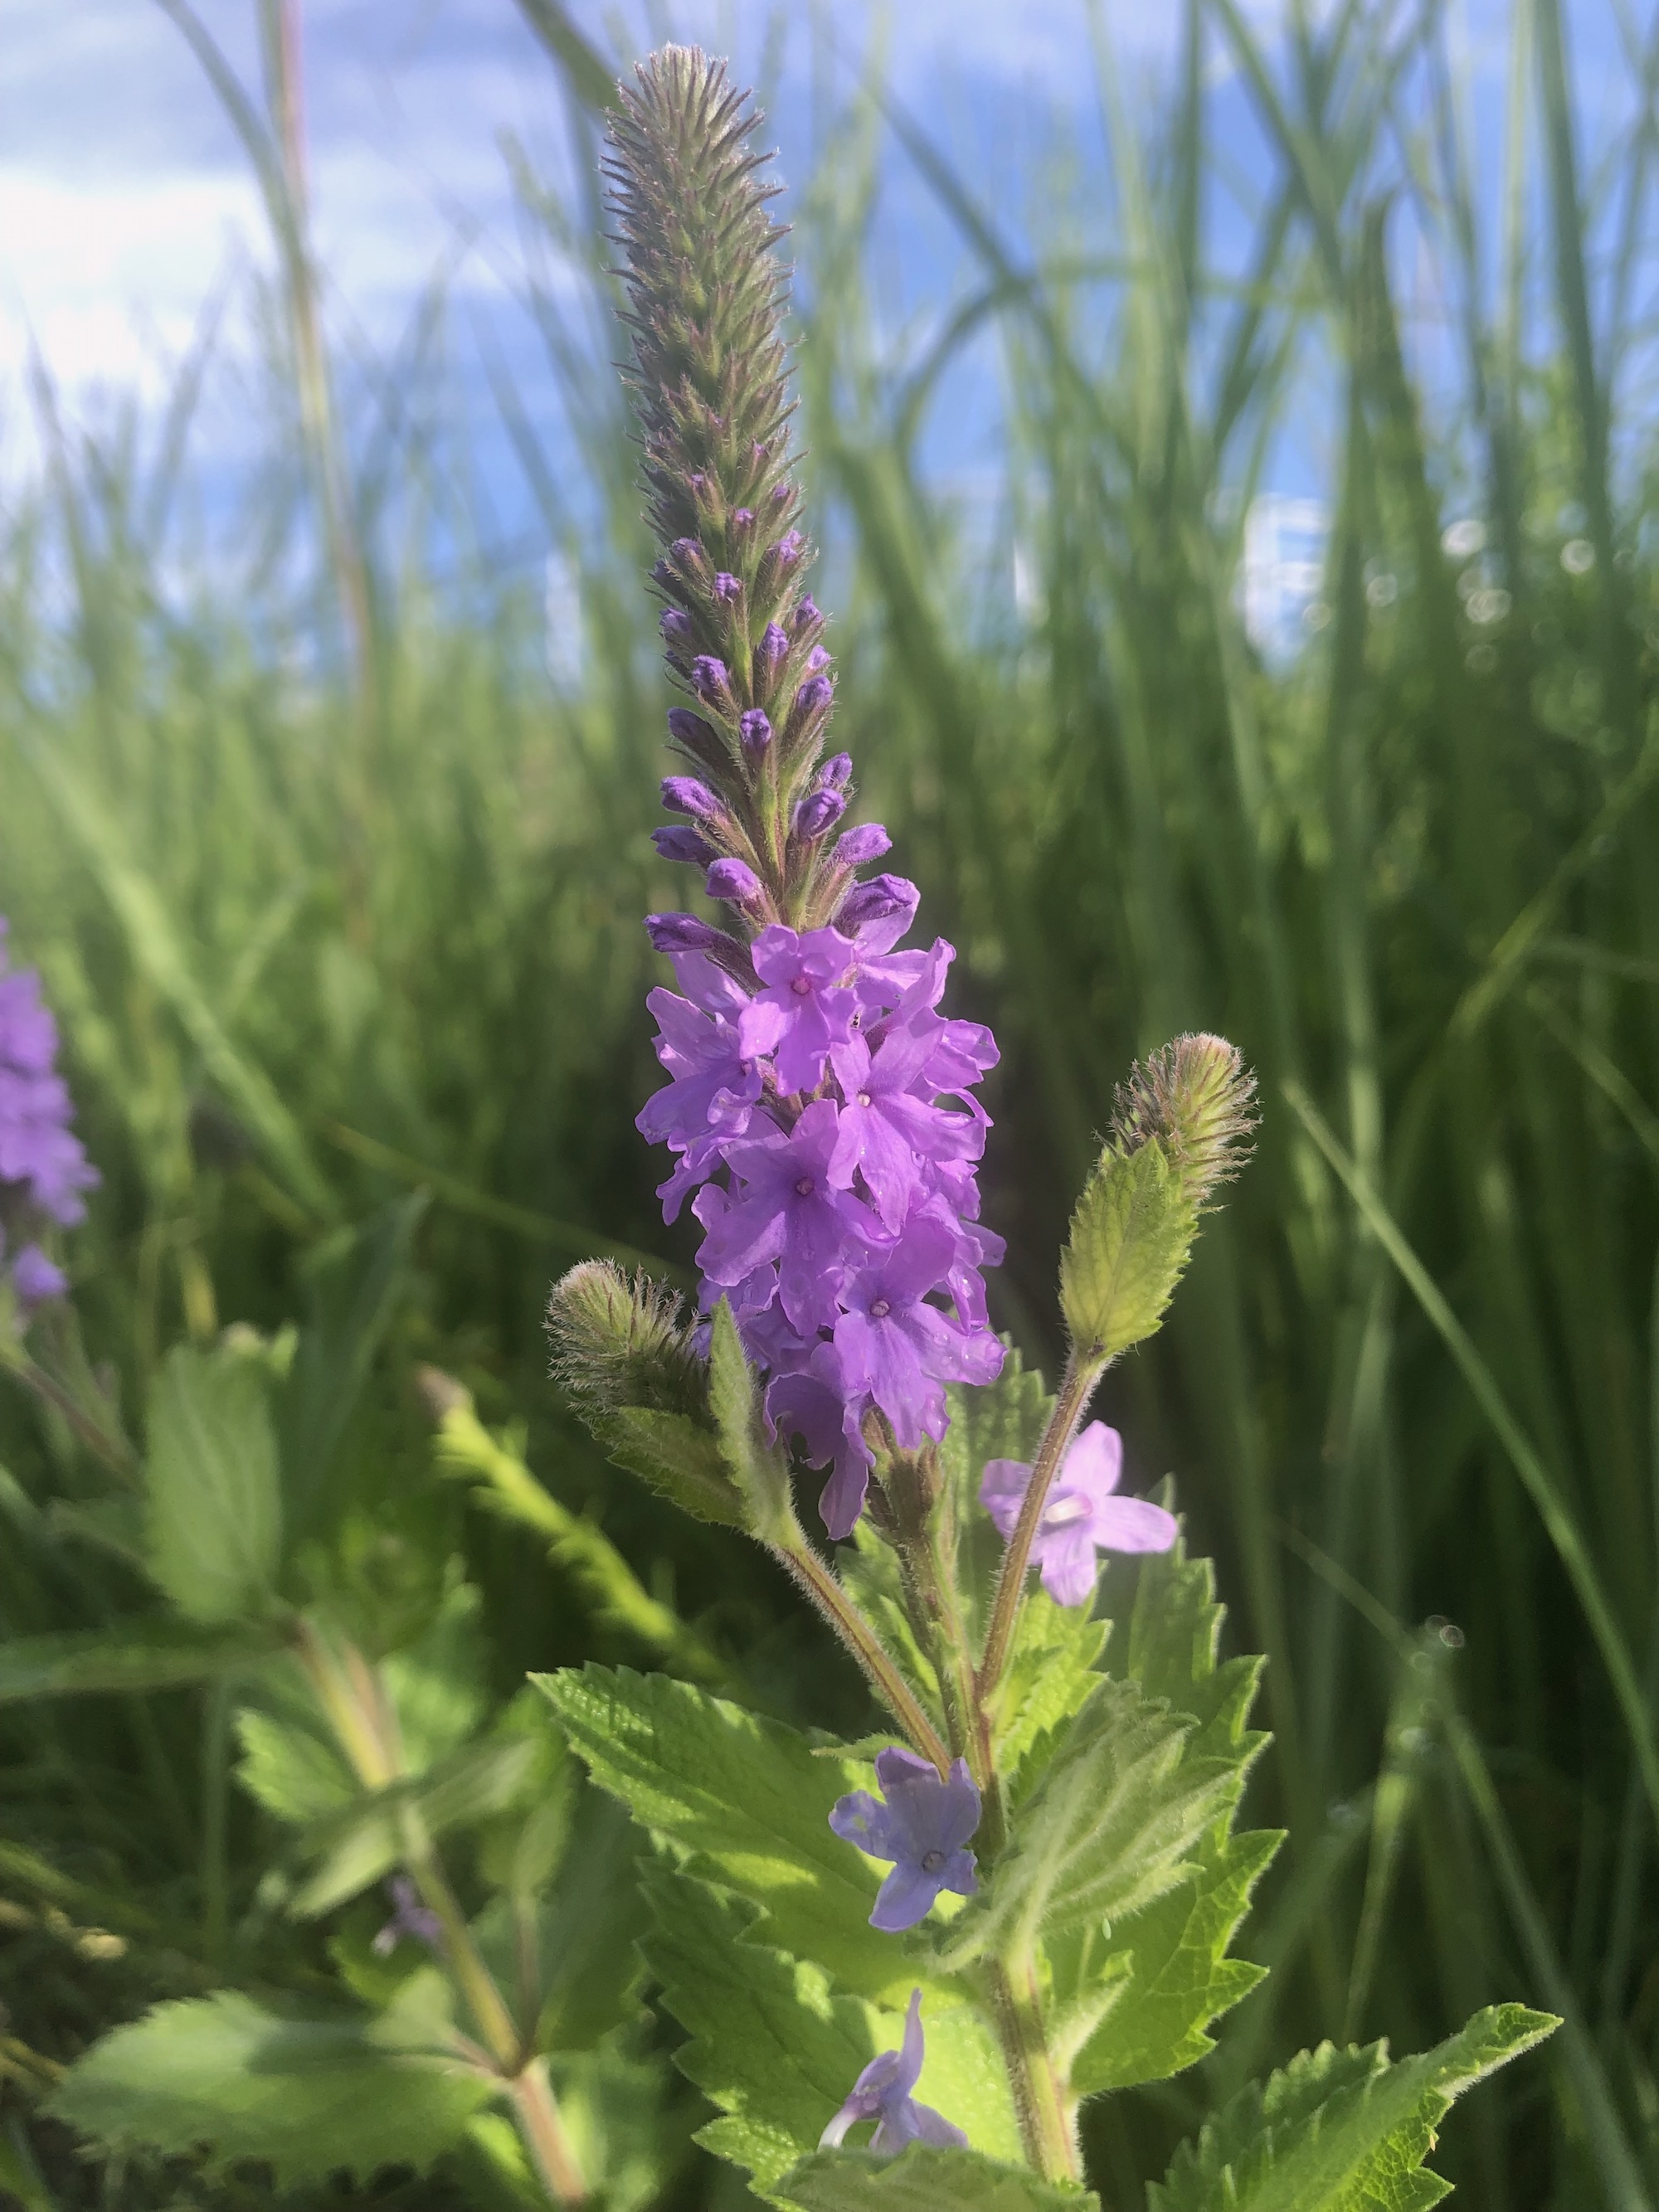 Hoary Vervain next to the UW Arboretum Visitors Center in Madison, Wisconsin on June 30, 2021.